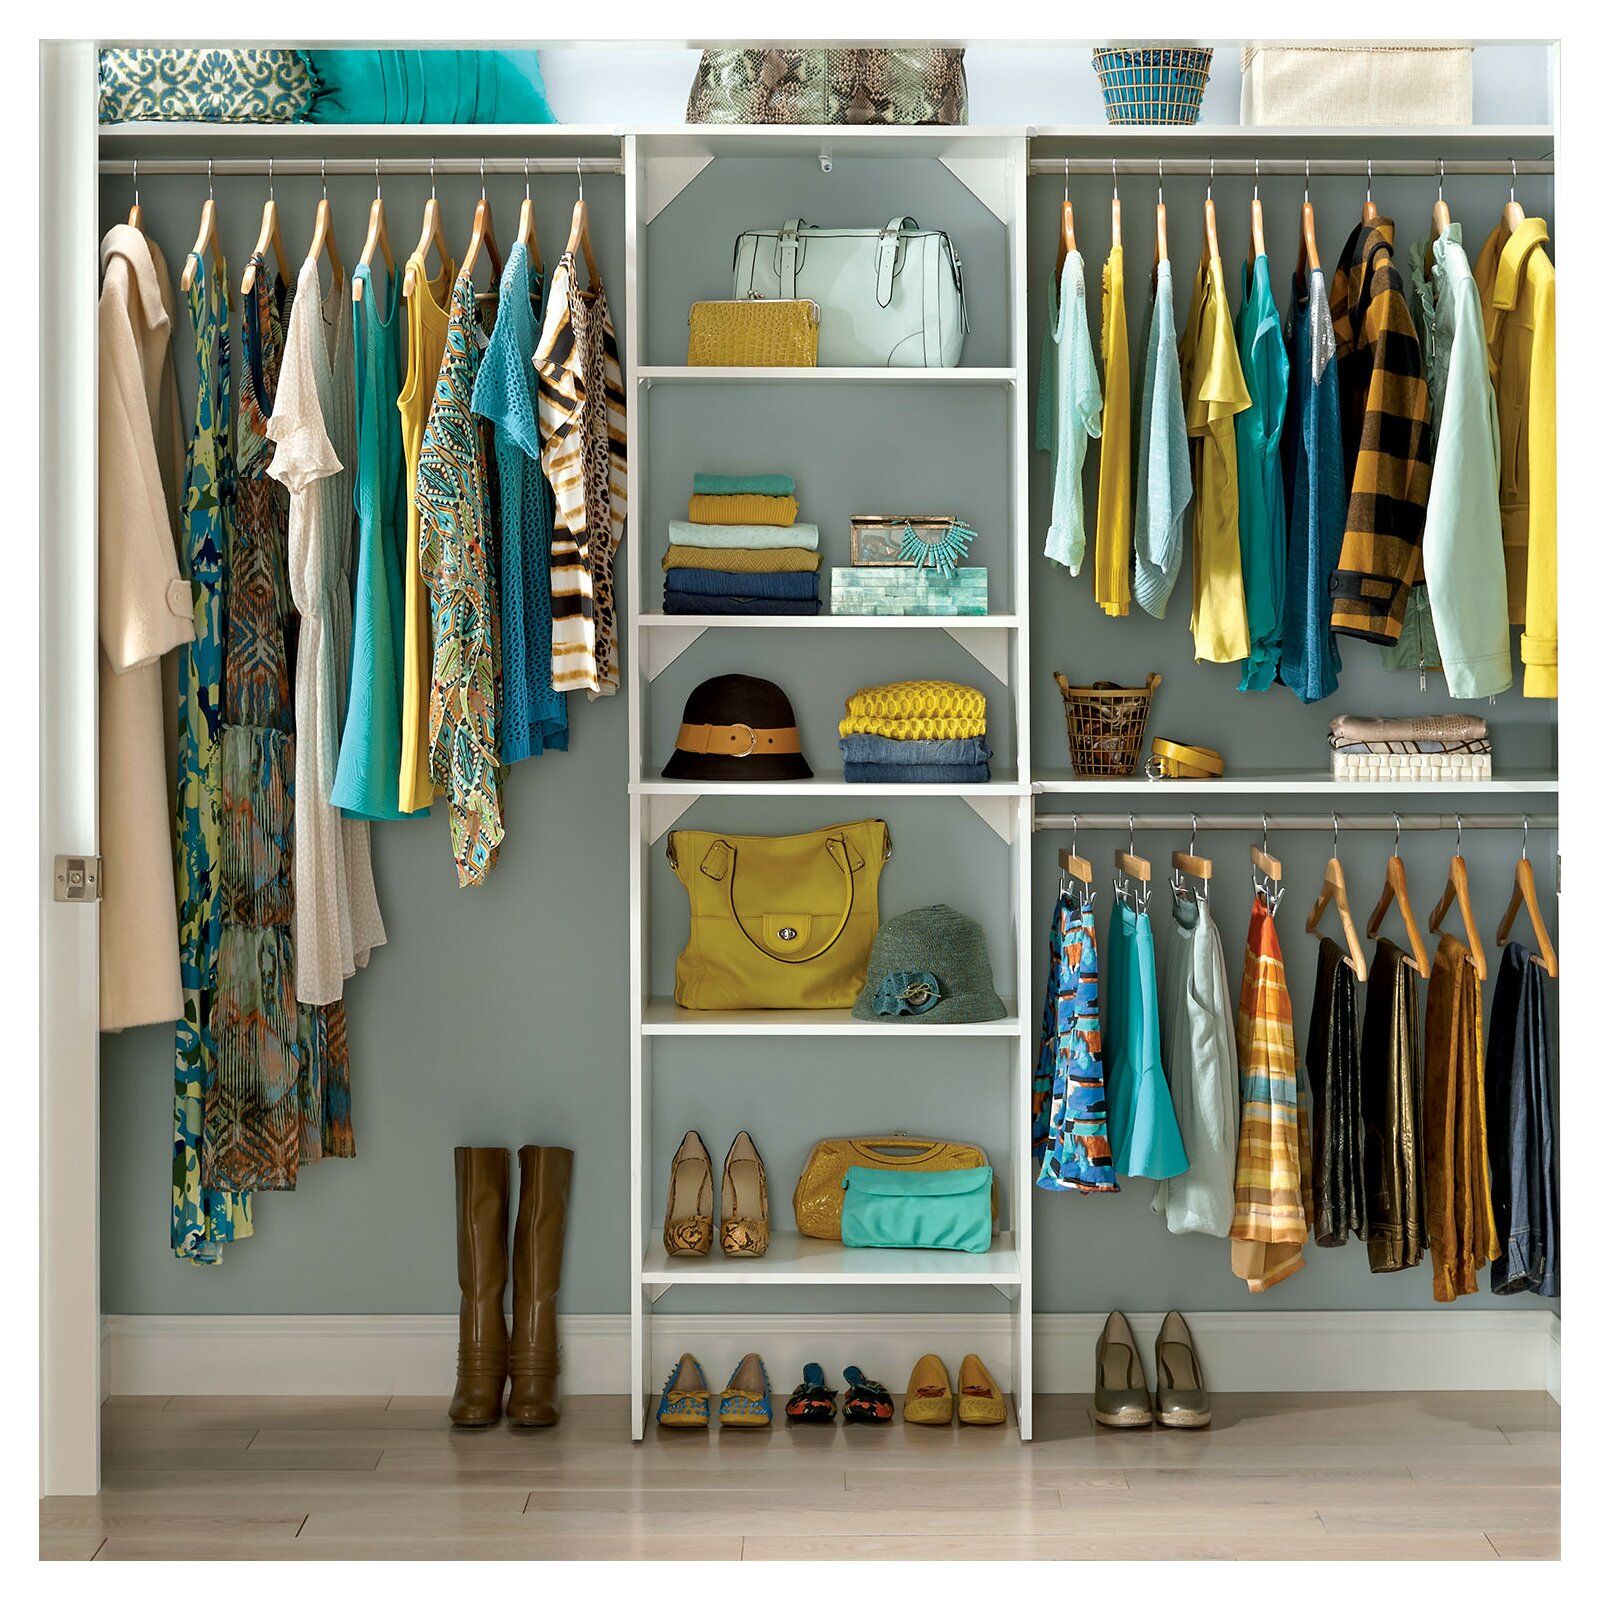 How To Put Shelves In Closet